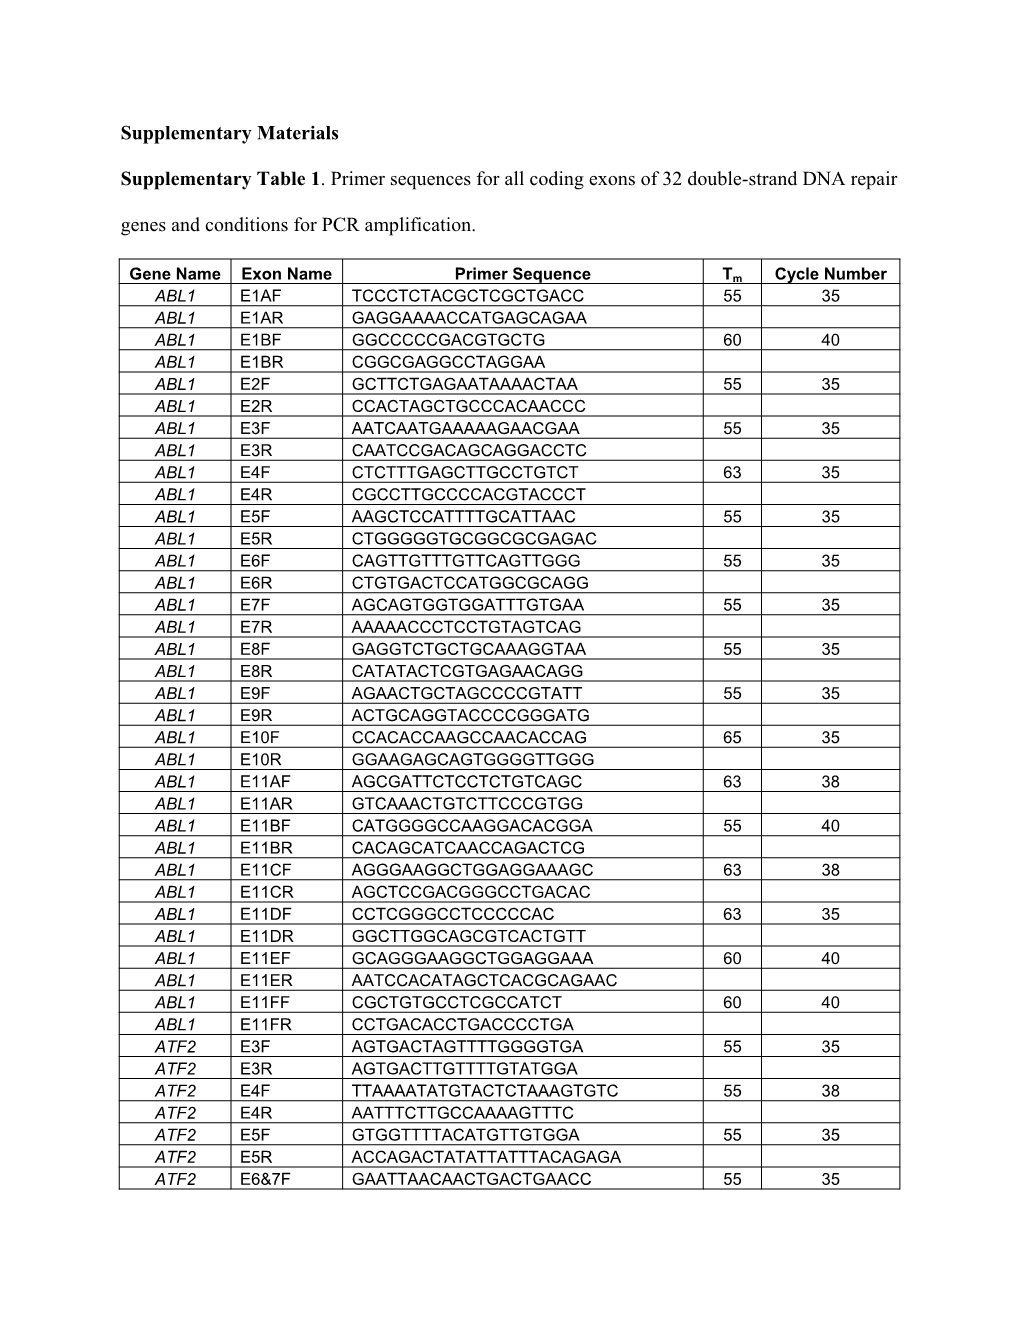 Supplementary Table 1. Primer Sequences for All Coding Exons of 32 Double-Strand DNA Repair Genes and Conditions for PCR Amplification